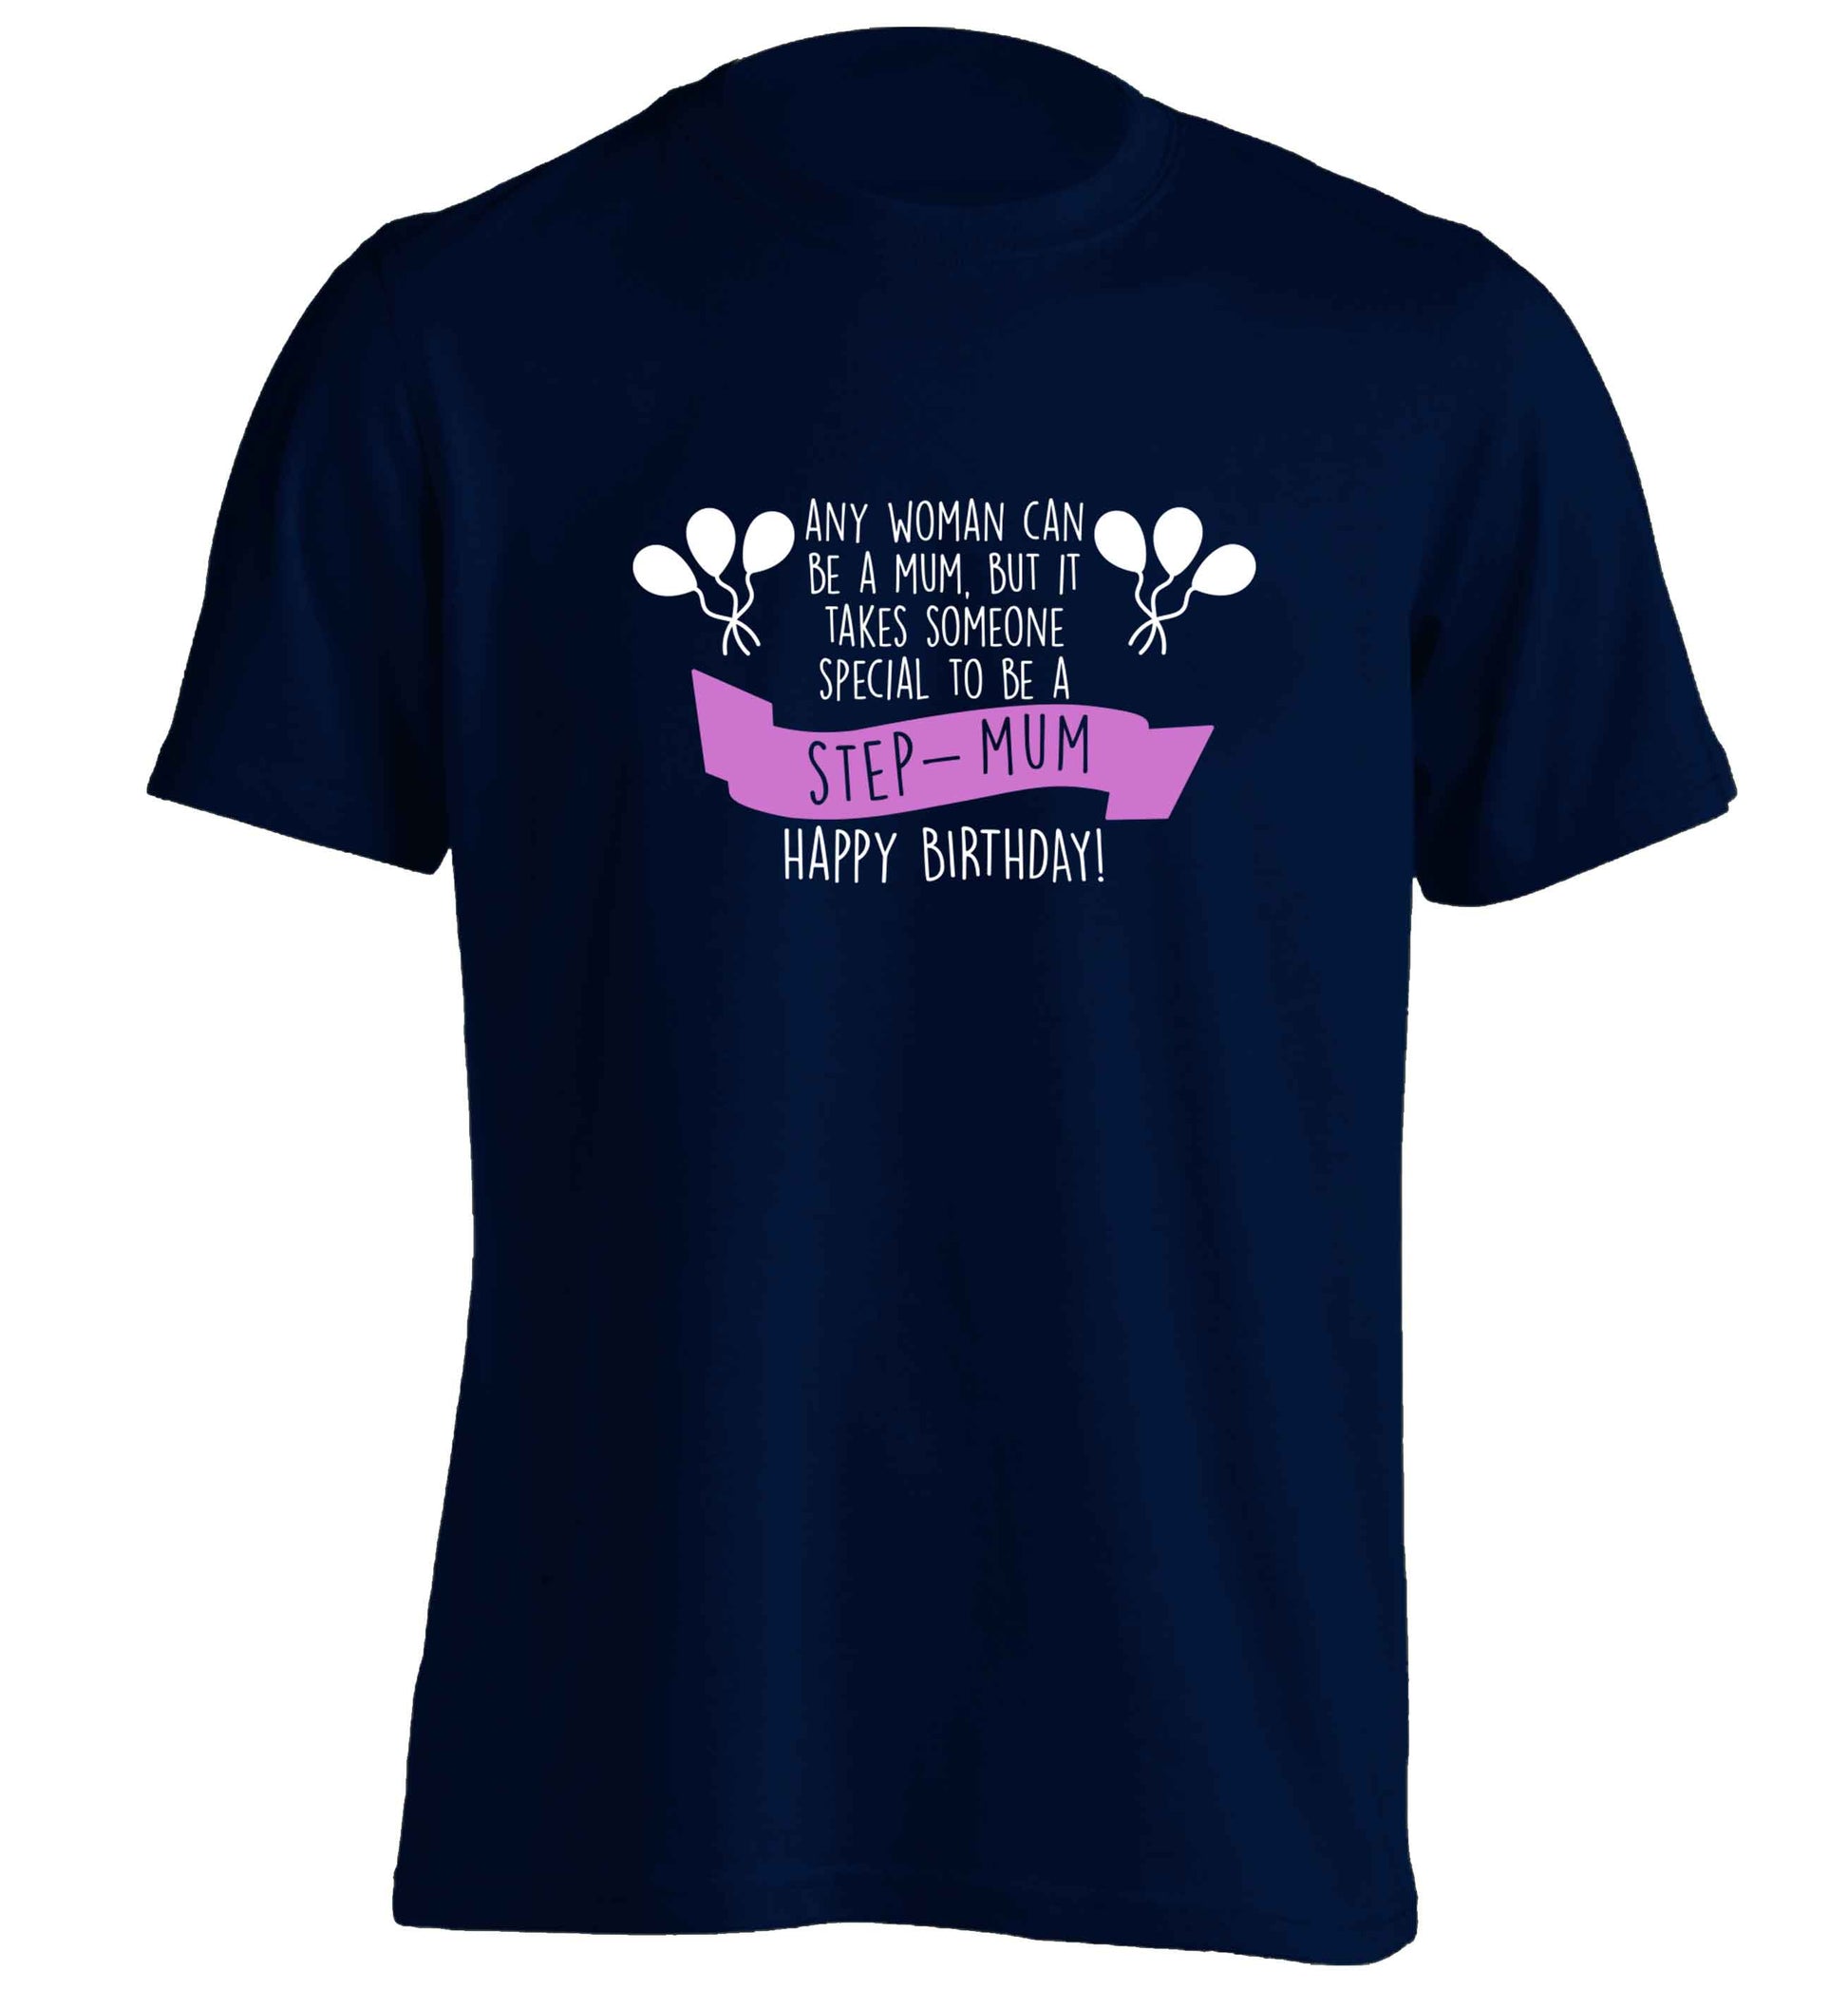 Takes someone special to be a step-mum, happy birthday! adults unisex navy Tshirt 2XL